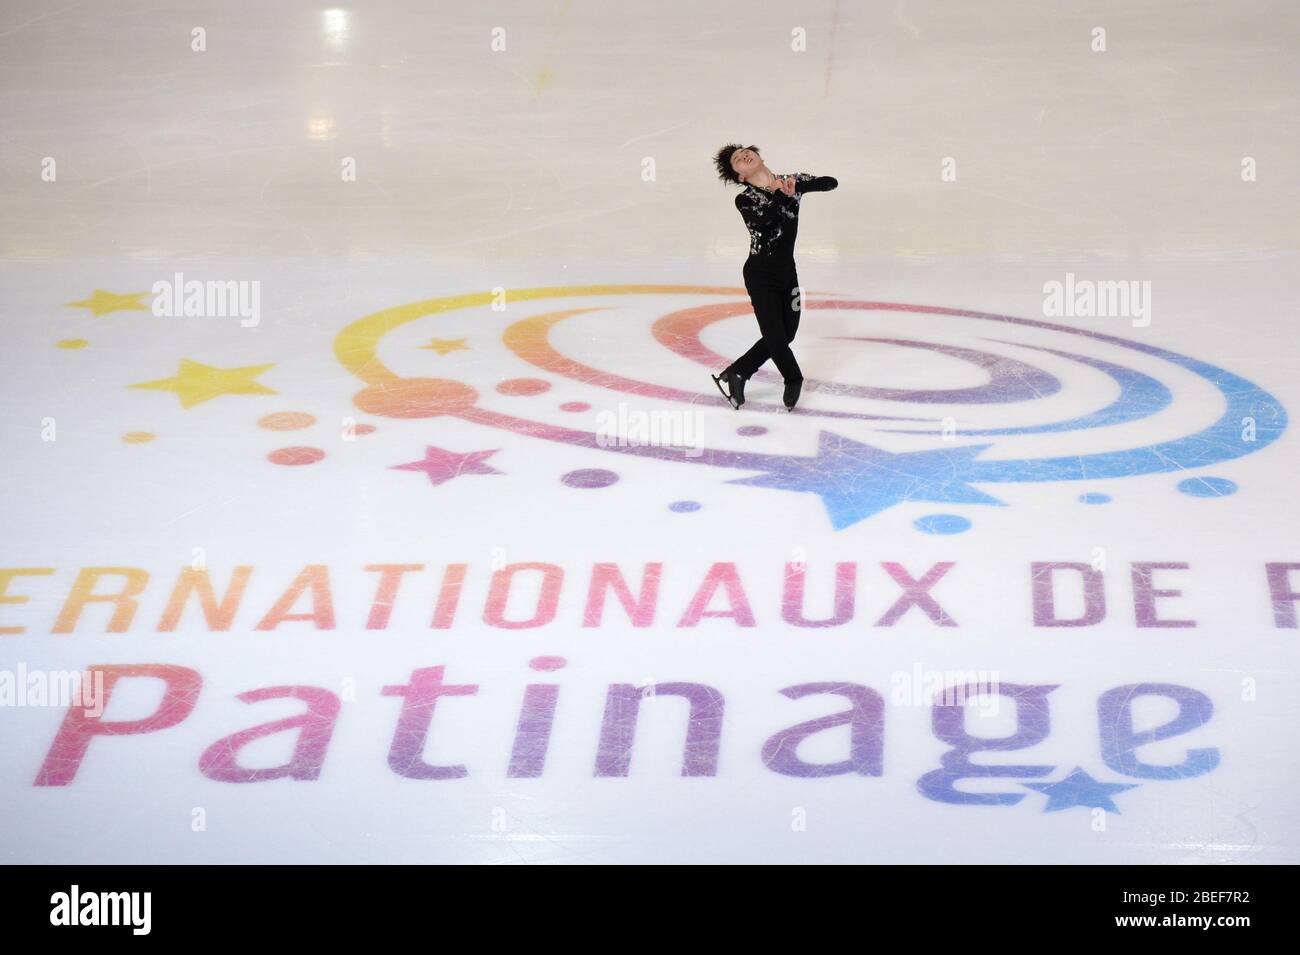 Shoma UNO, from Japan, during Free Program at ISU Grand Prix of Figure Skating 2019, Internationaux de France de Patinage 2019 at Patinoire Polesud on November 02, 2019 in Grenoble, France. (Photo by Raniero Corbelletti/AFLO) Stock Photo